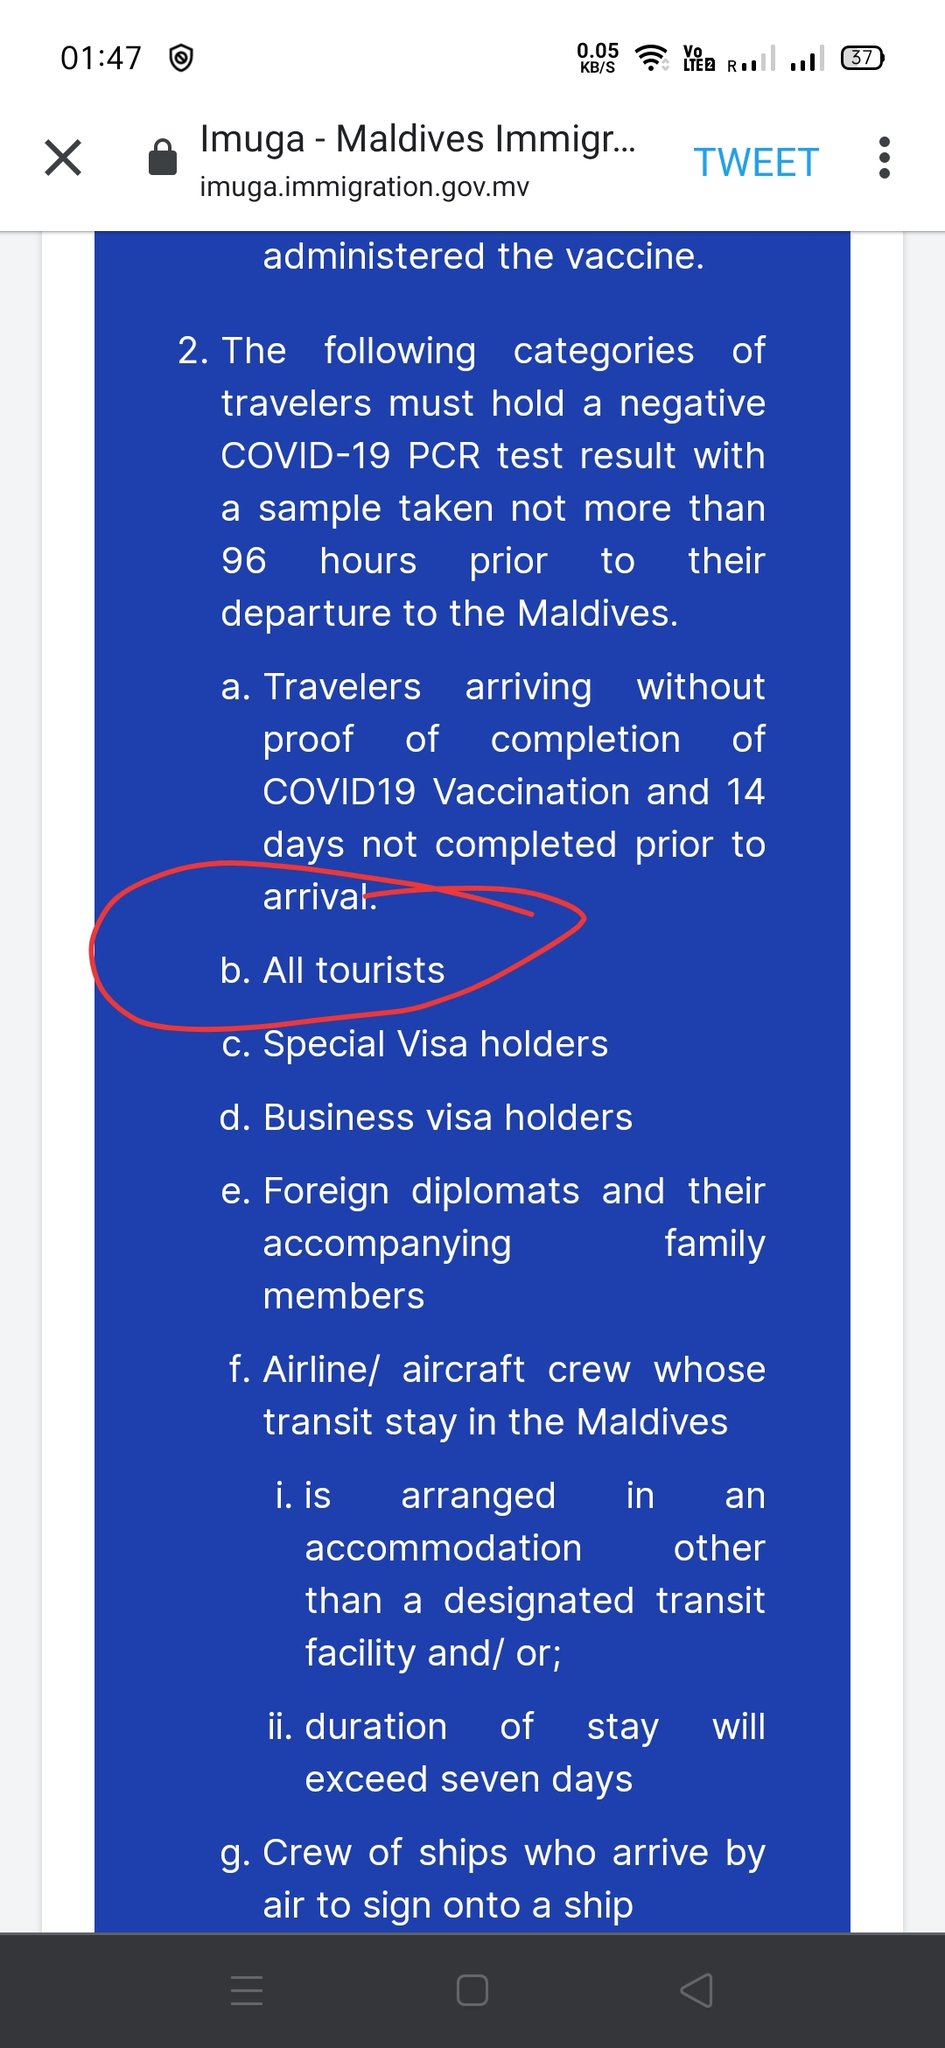 Ministry Of Tourism On Twitter Travel Ease To Maldives Without A Negative Pcr Test Will Be Effective From 20th April For Tourists Who Have Got The Final Dose Of Their Vaccine 14